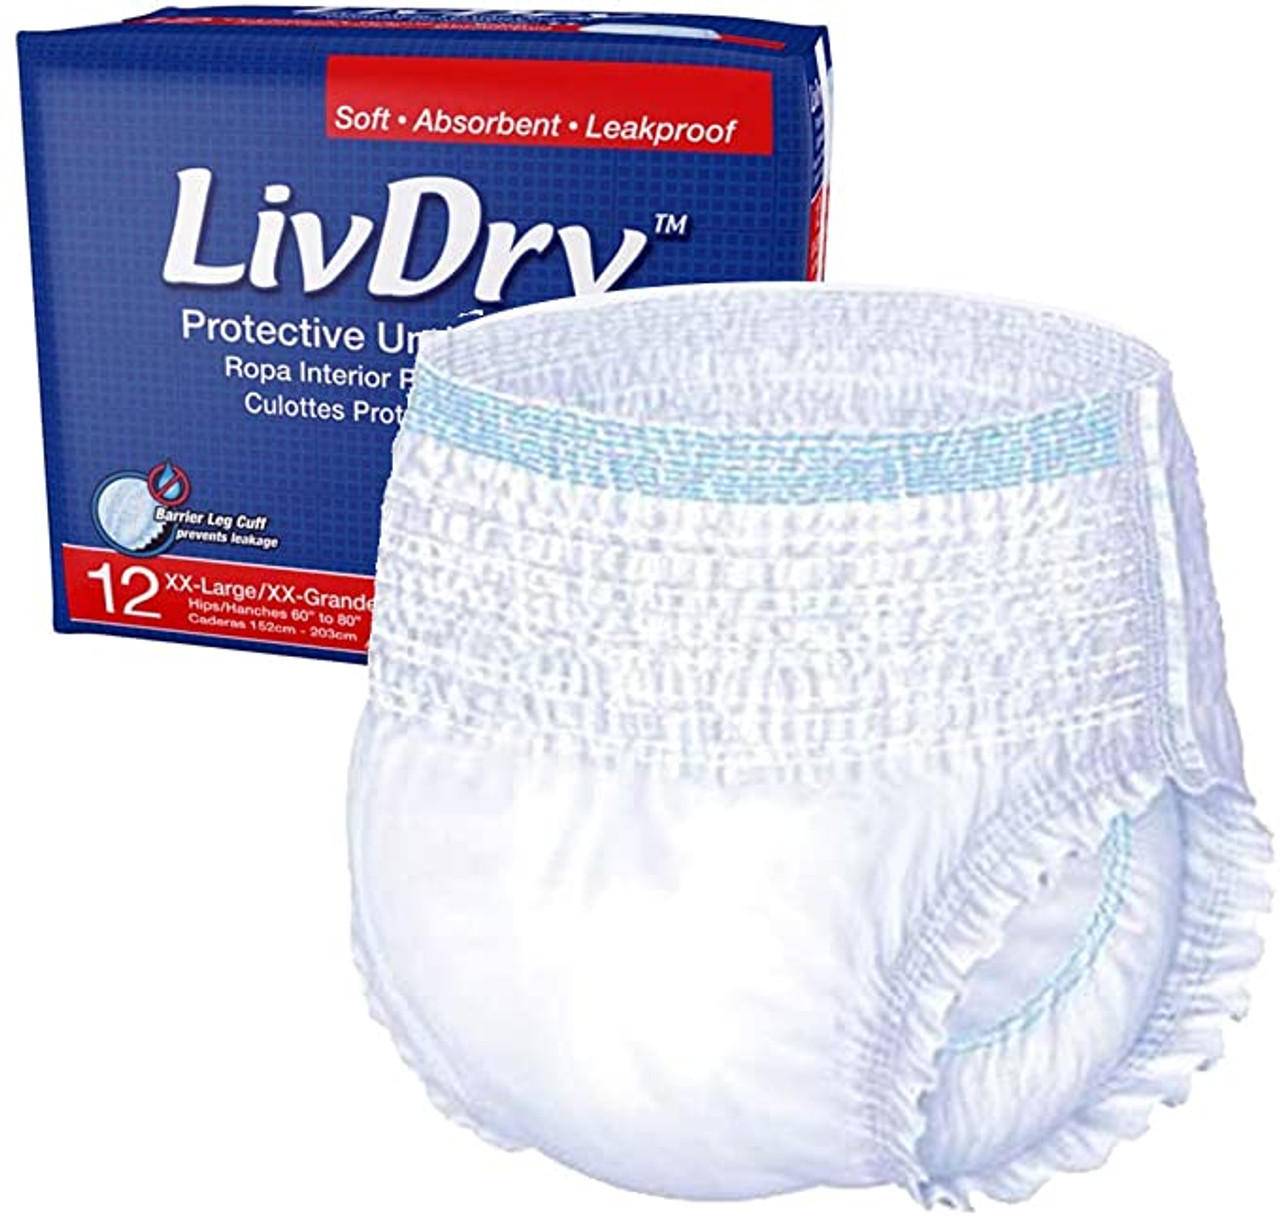 LivDry Protective Incontinence Pants